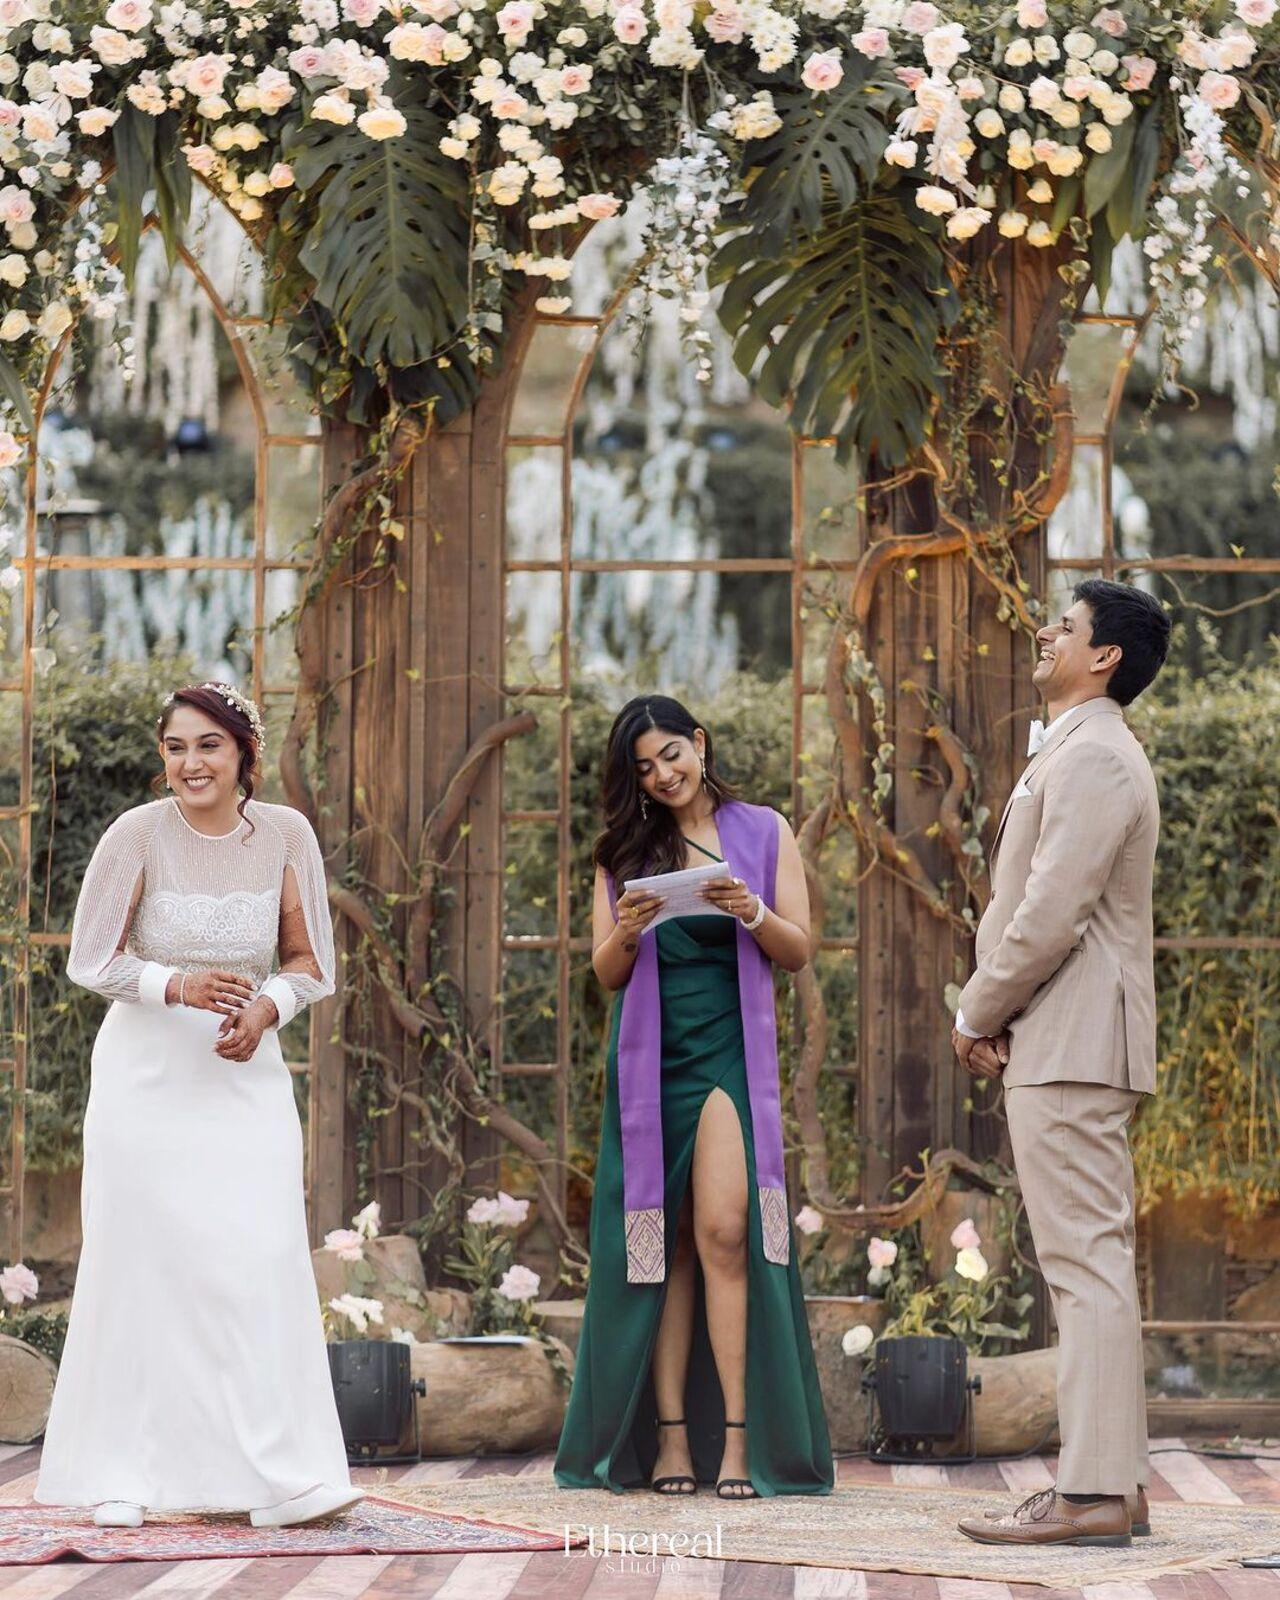 Ira and Nupur have a light moment as the former's cousin Zayn Marie officiates their wedding